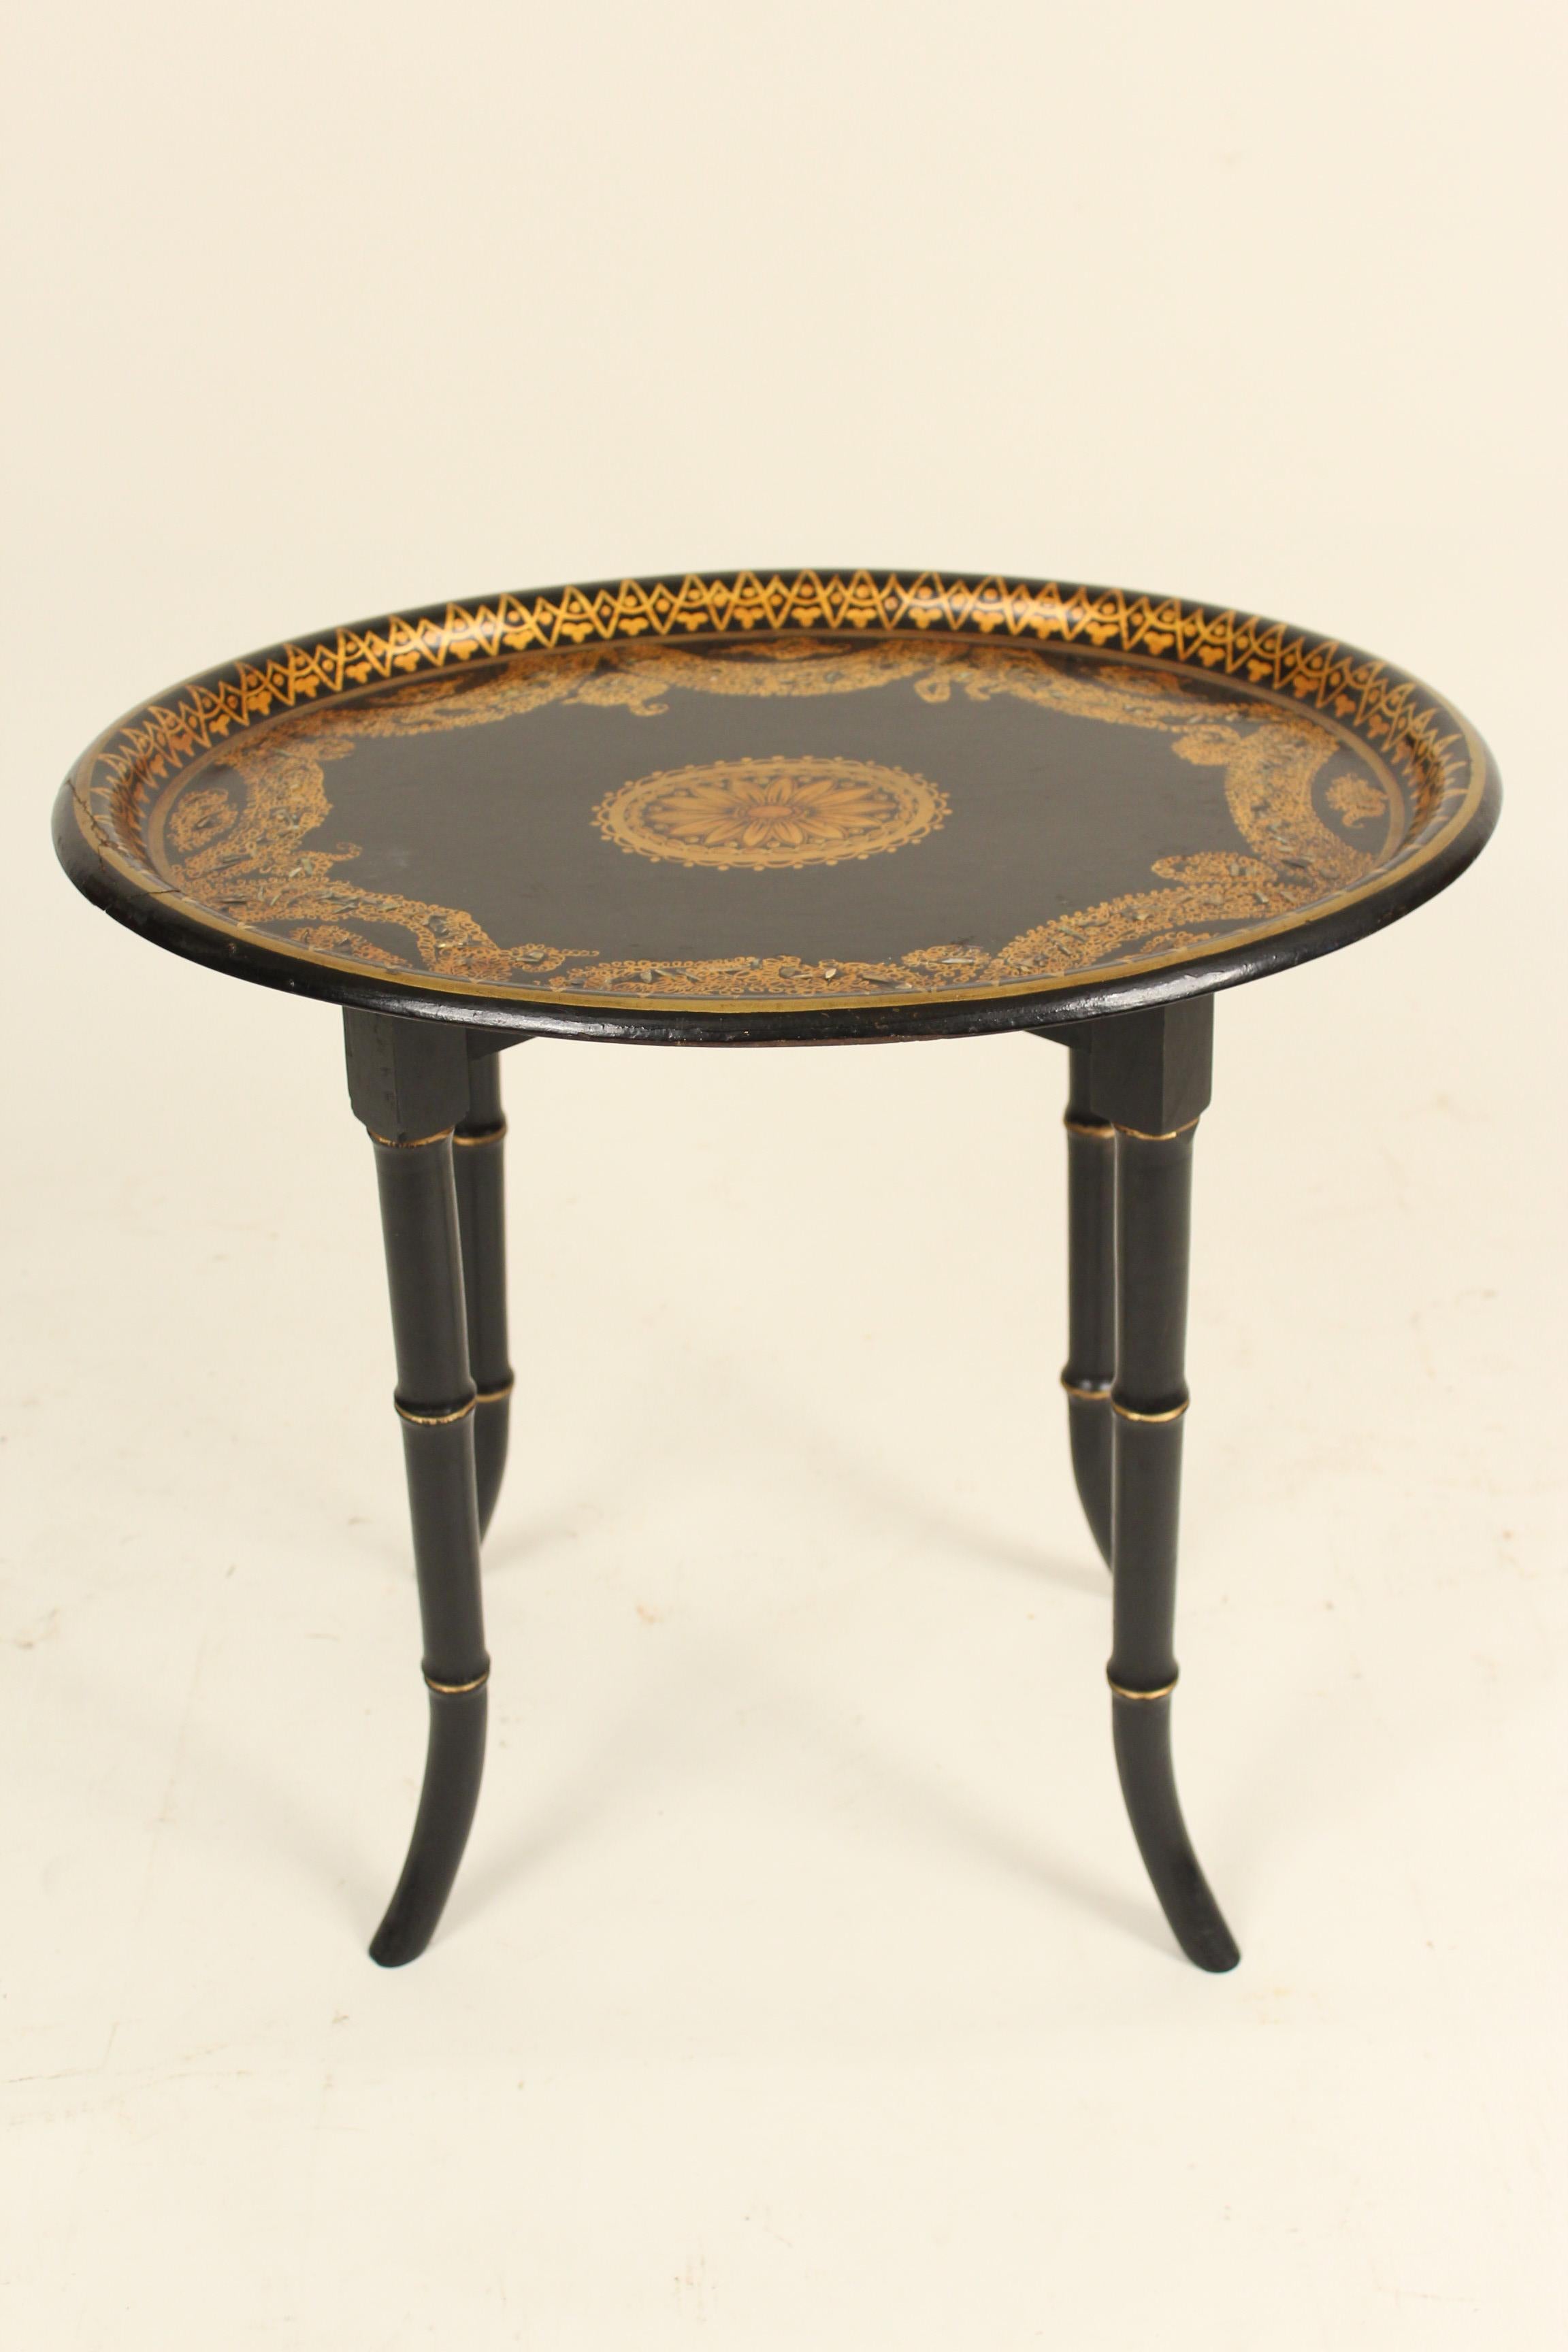 English Regency style late 19th century papier mâché tray on a late 20th century bamboo style stand. The tray has gilt decoration and mother of pearl inlay. The tray is attached to the stand.